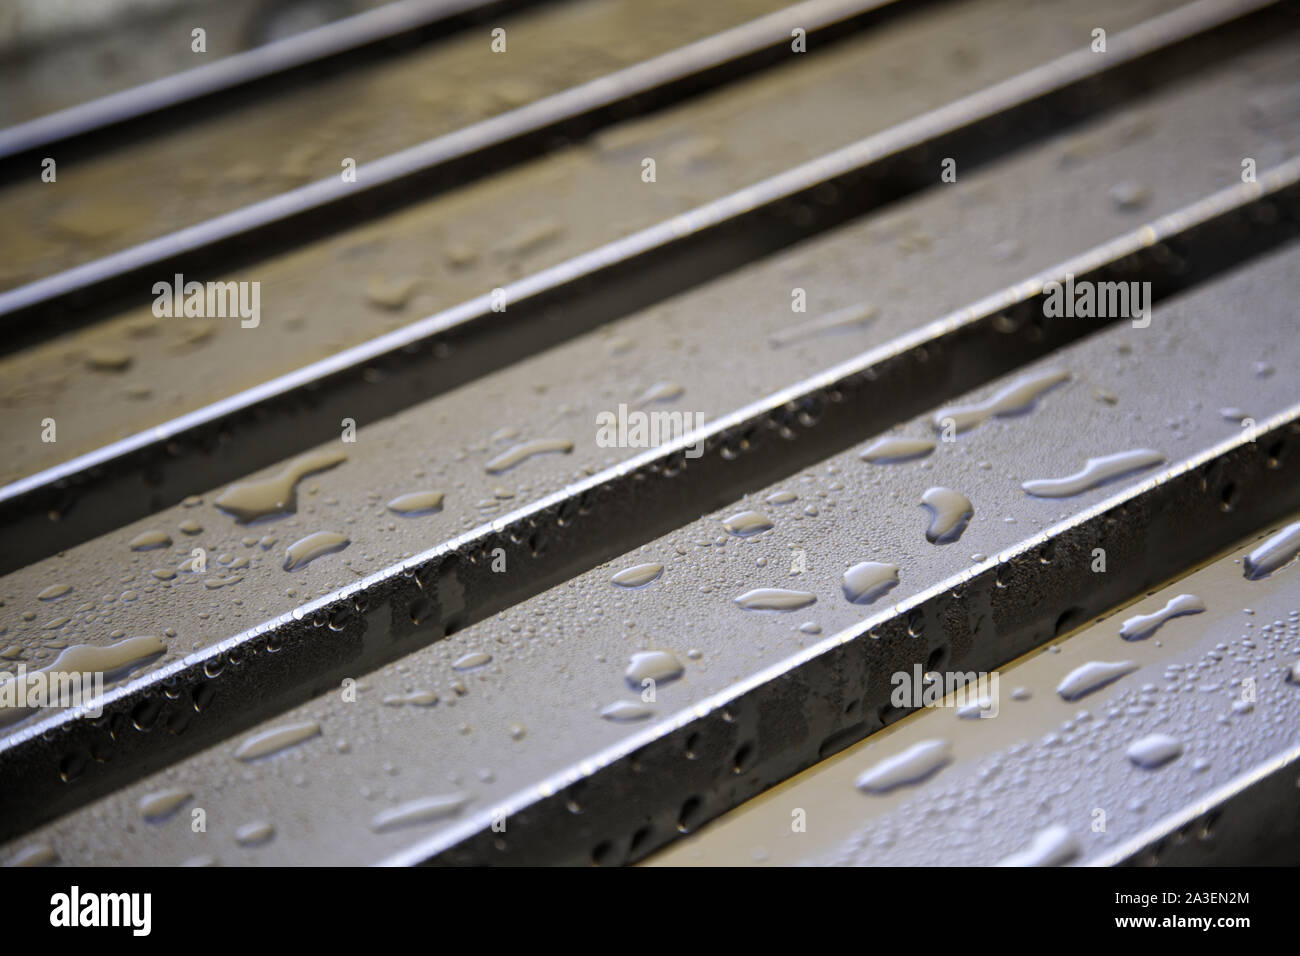 Metal drops, rain and temporary water, texture and background Stock Photo